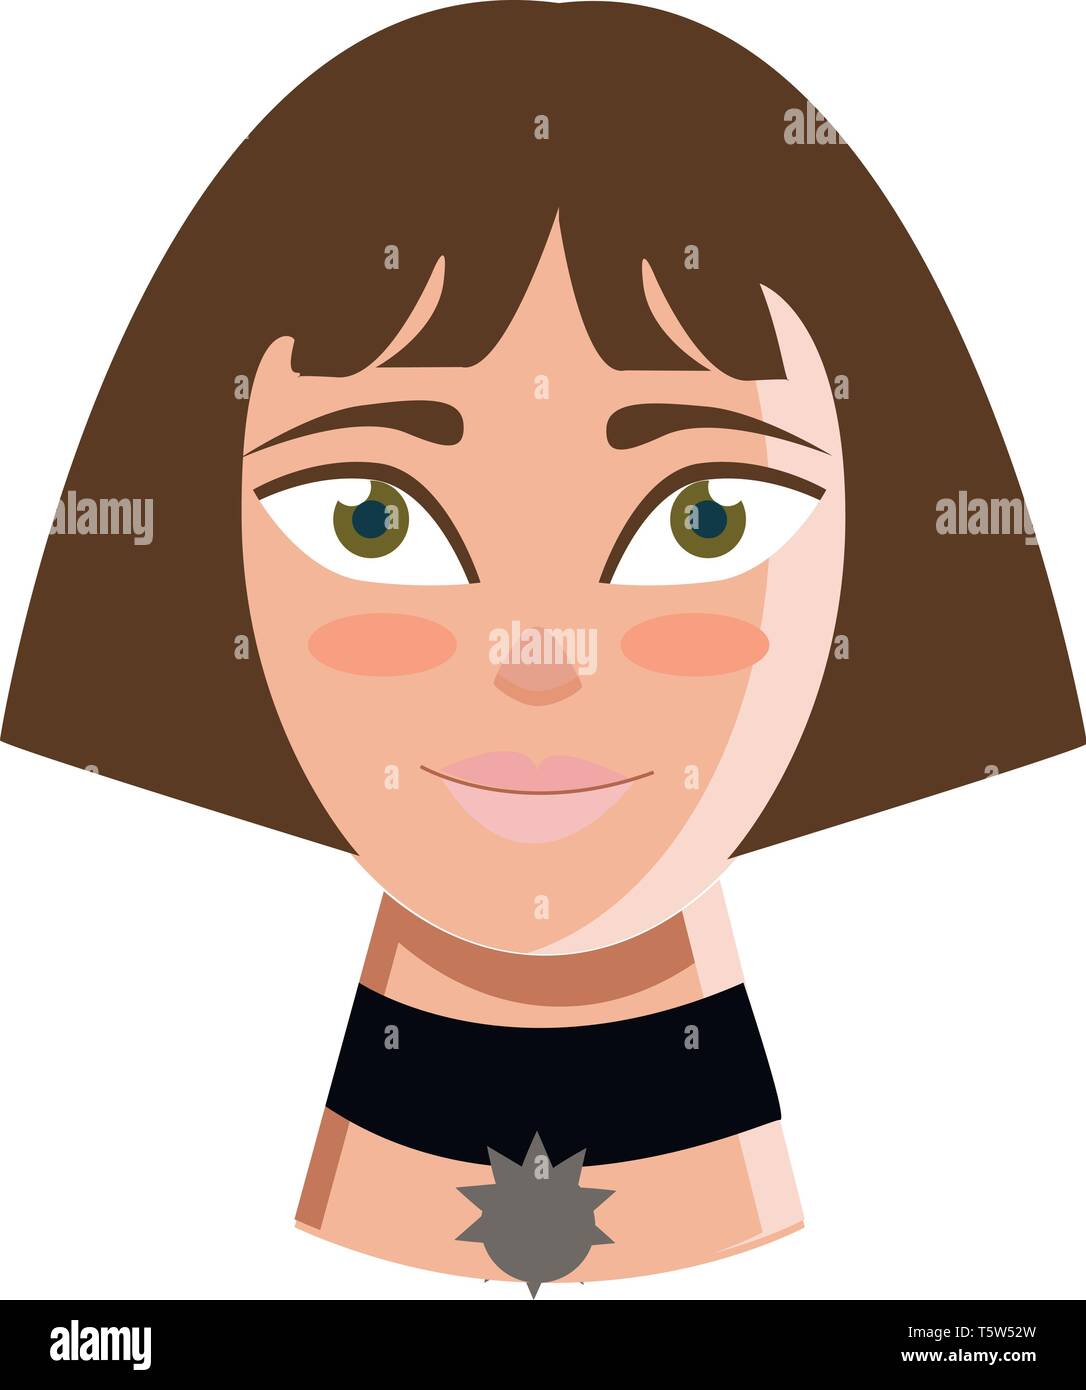 Clipart of a famous comic Matilda vector or color illustration Stock Vector  Image & Art - Alamy